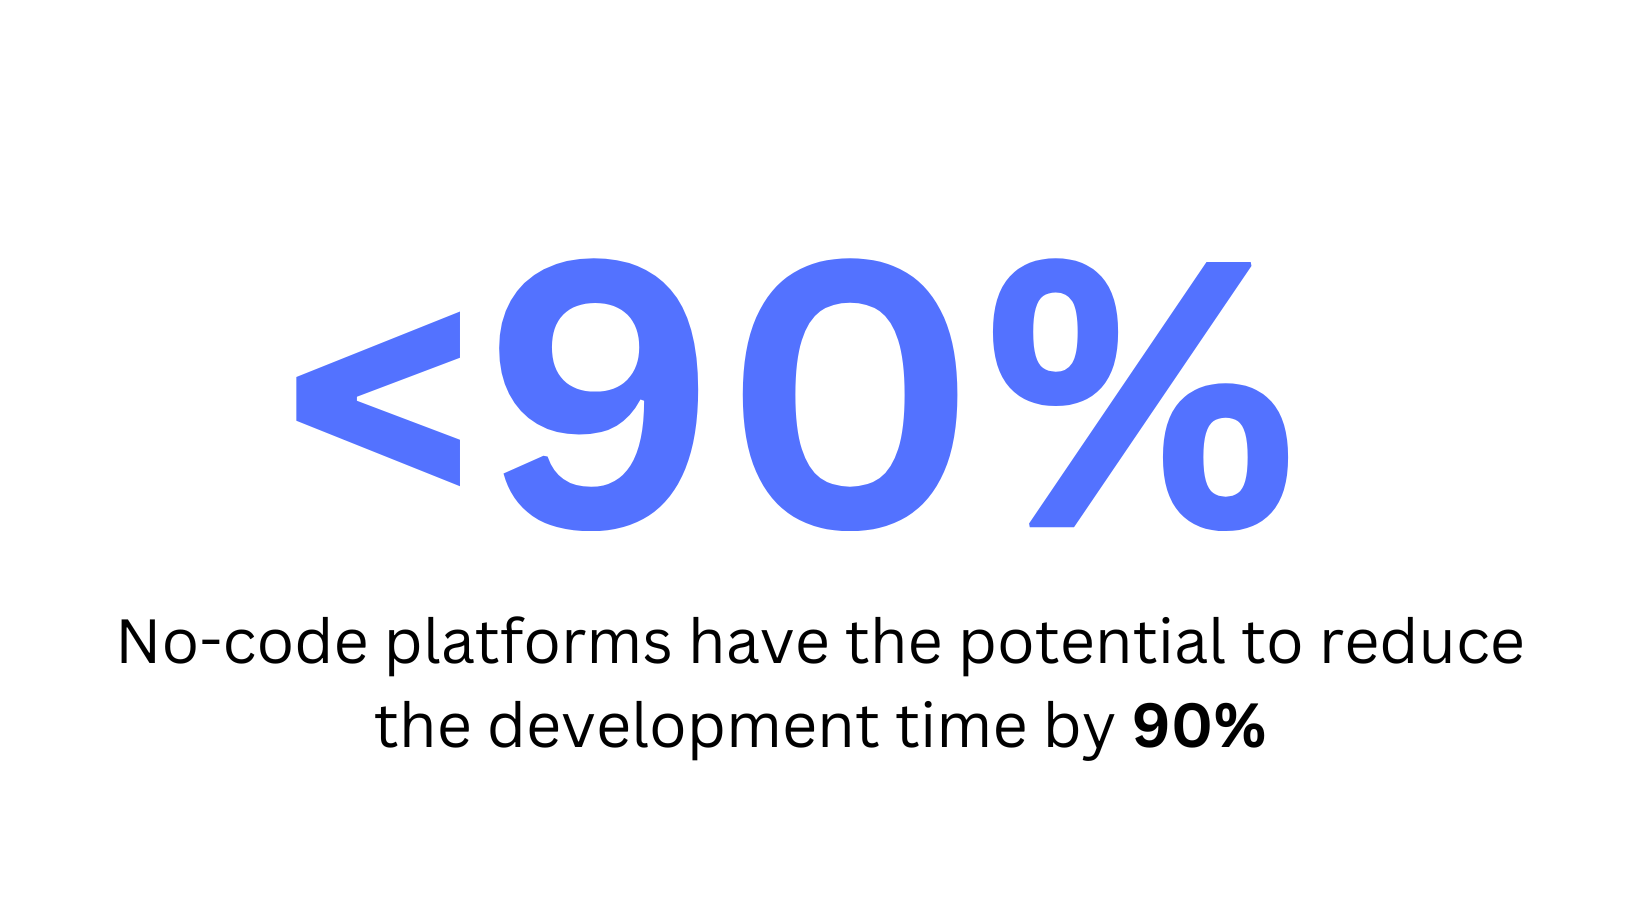 No-code platforms have the potential to reduce the development time by 90%